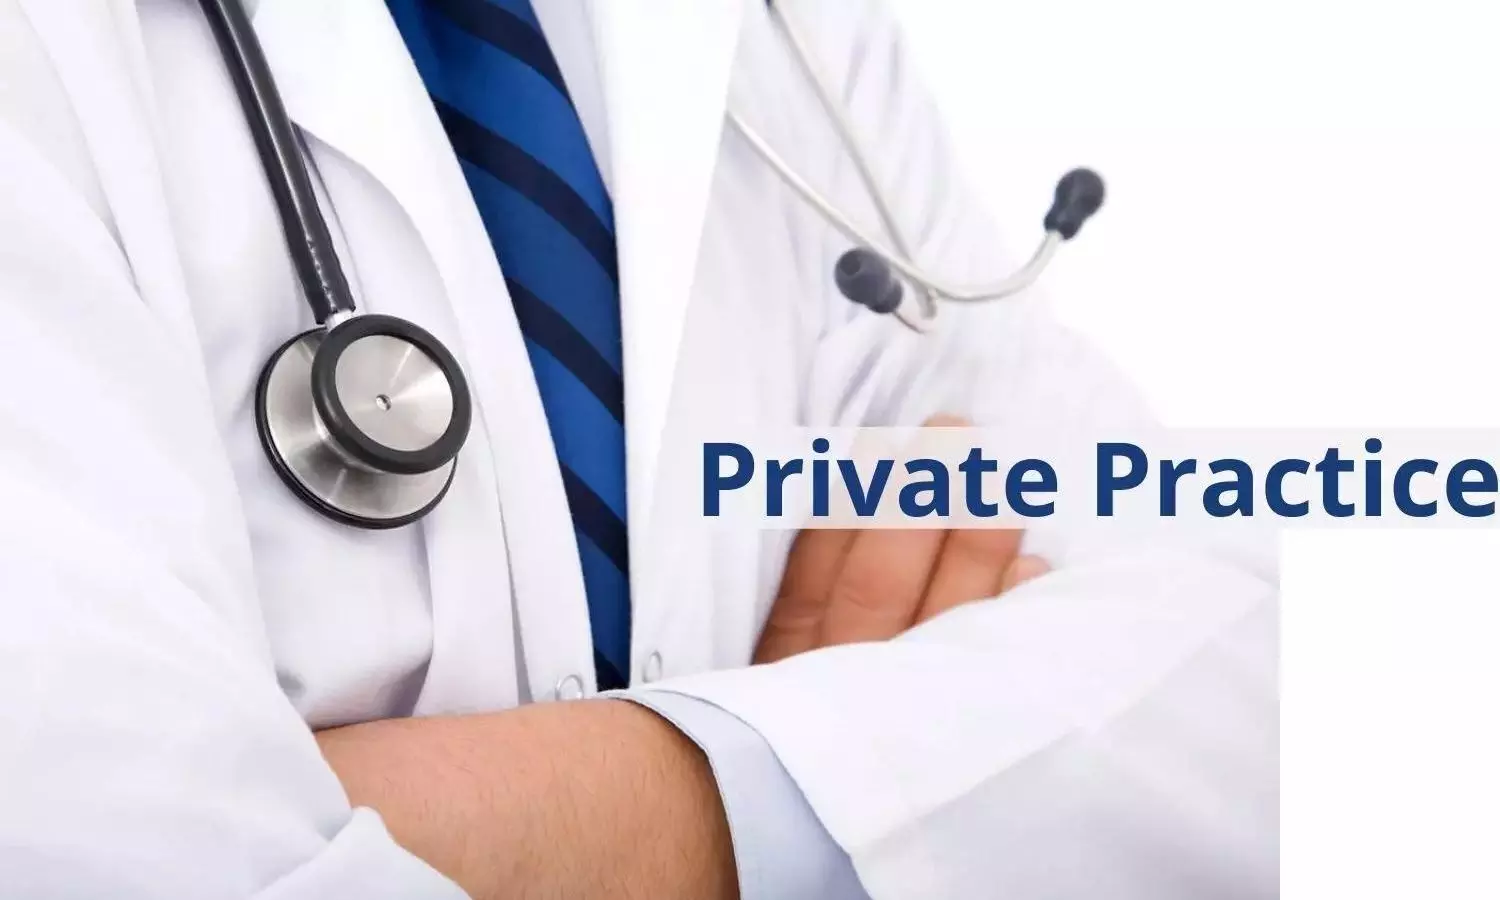 Punjab: Govt doctors continue to indulge in private practice despite ban